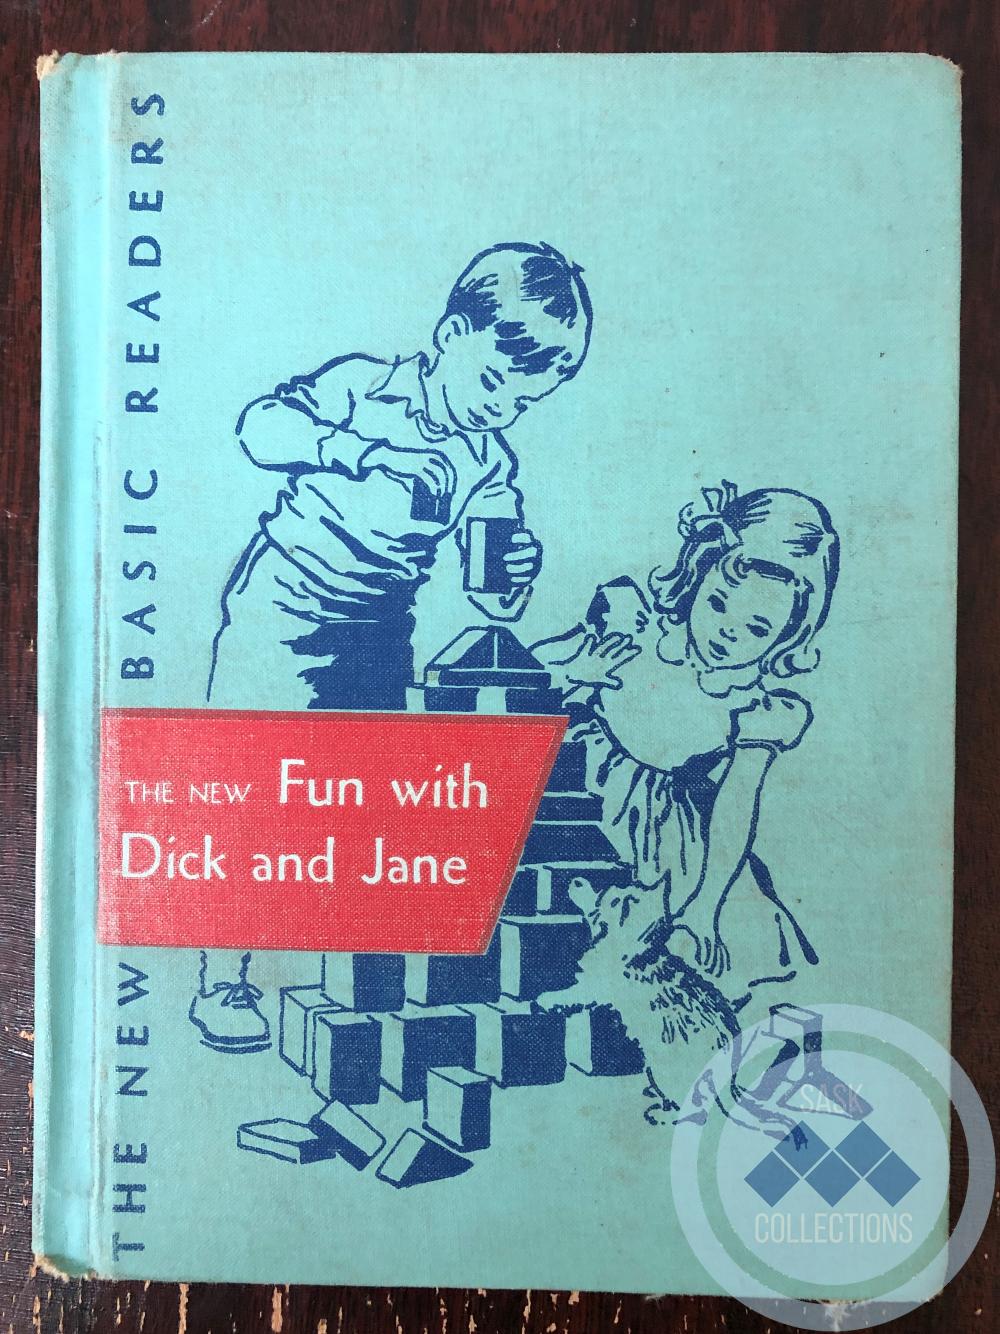 The New Basic Readers - The New Fun with Dick and Jane